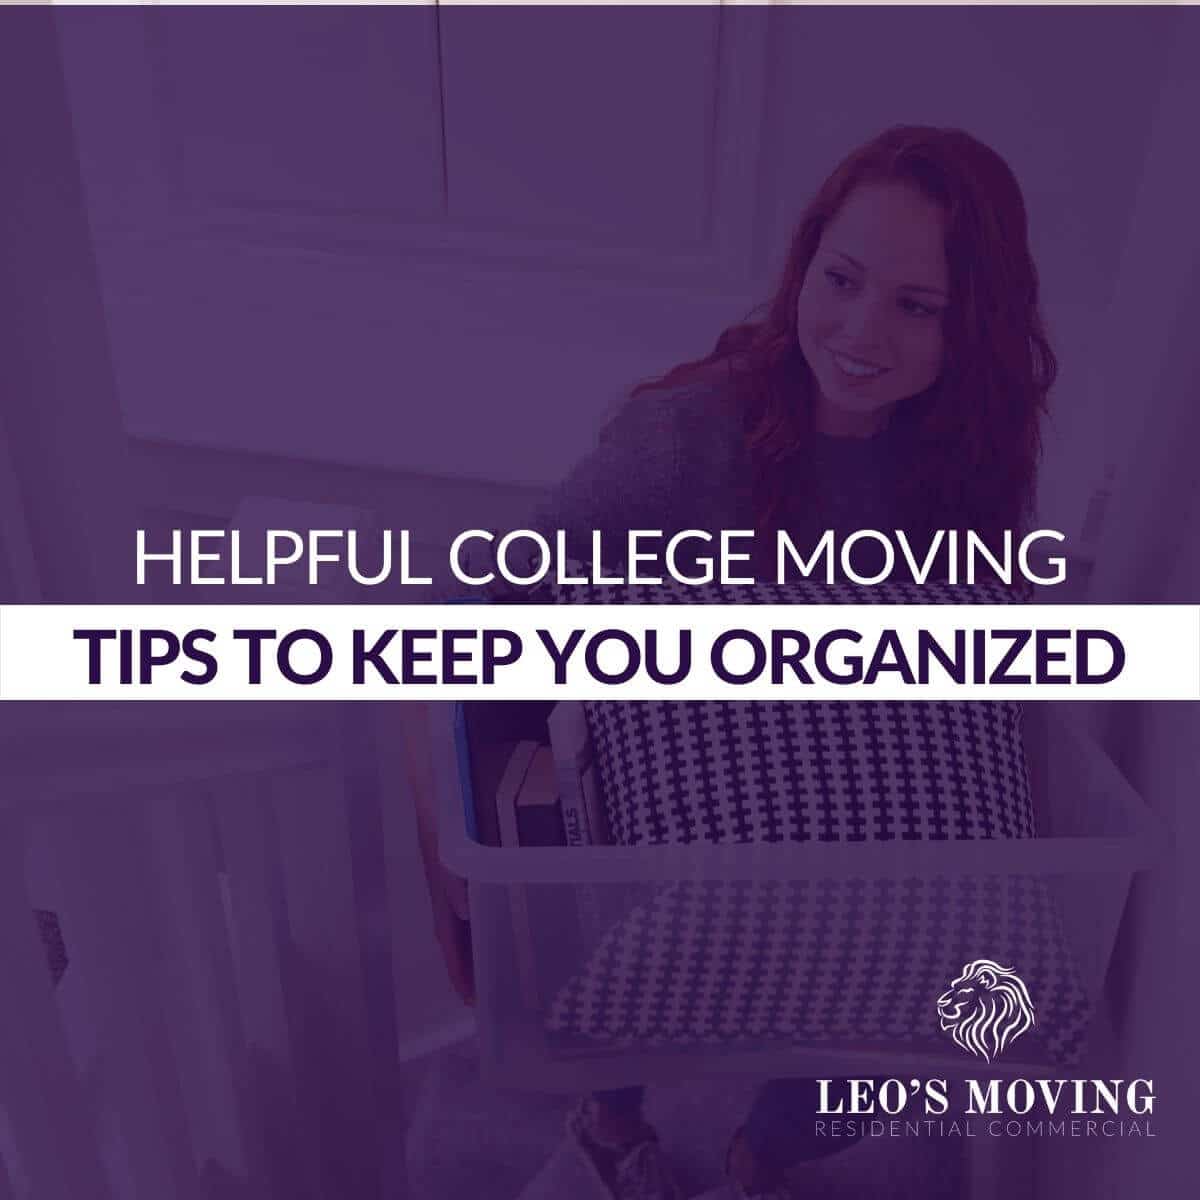 Helpful College Moving Tips to Keep You Organized